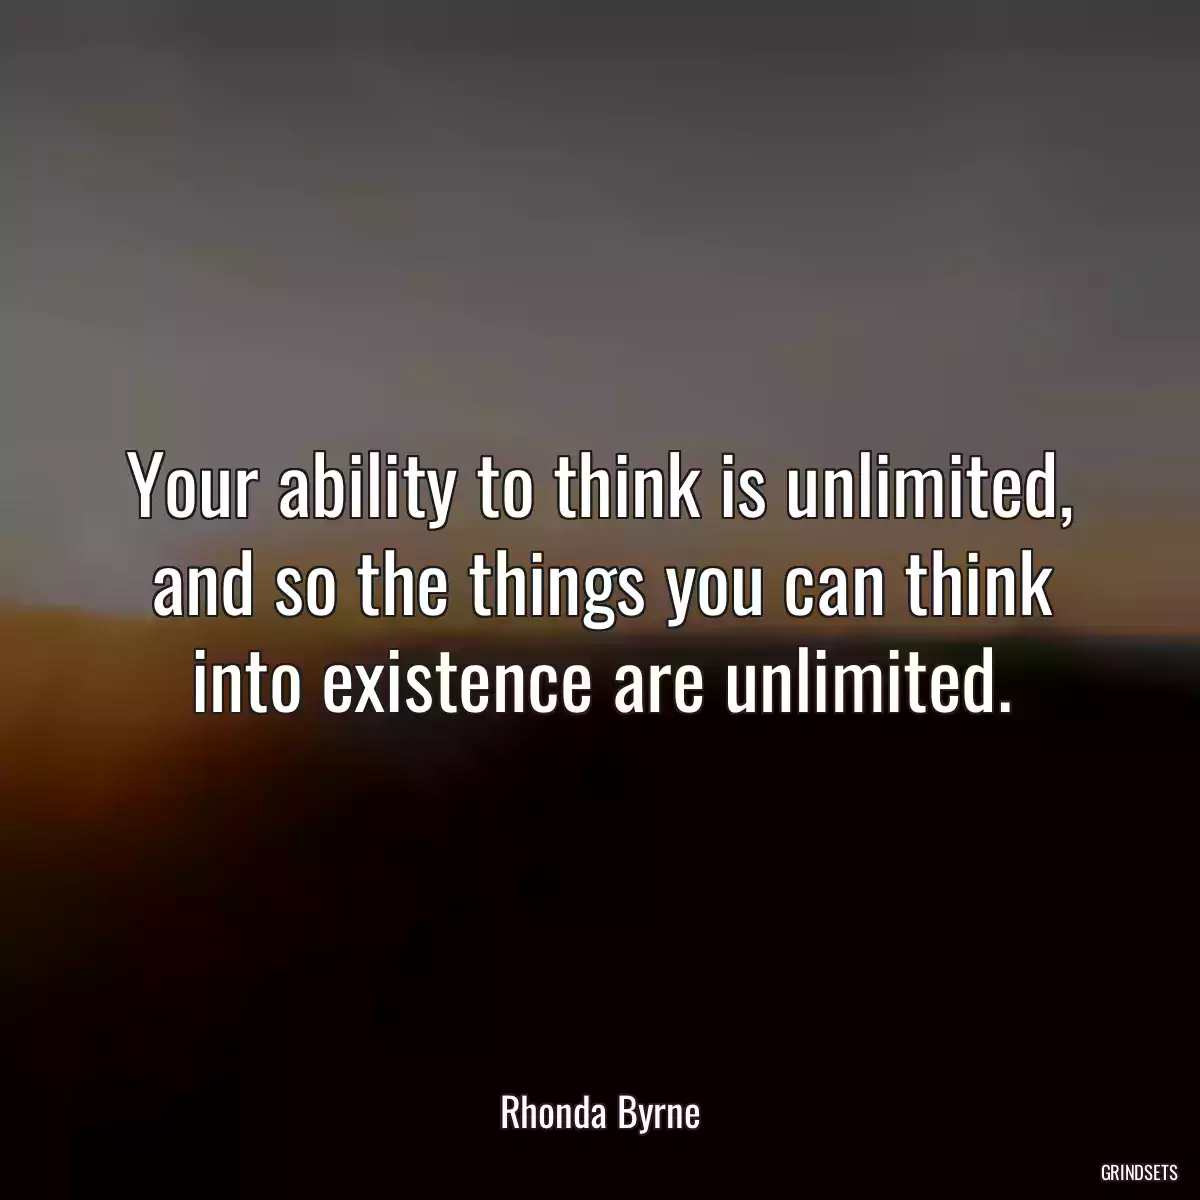 Your ability to think is unlimited, and so the things you can think into existence are unlimited.